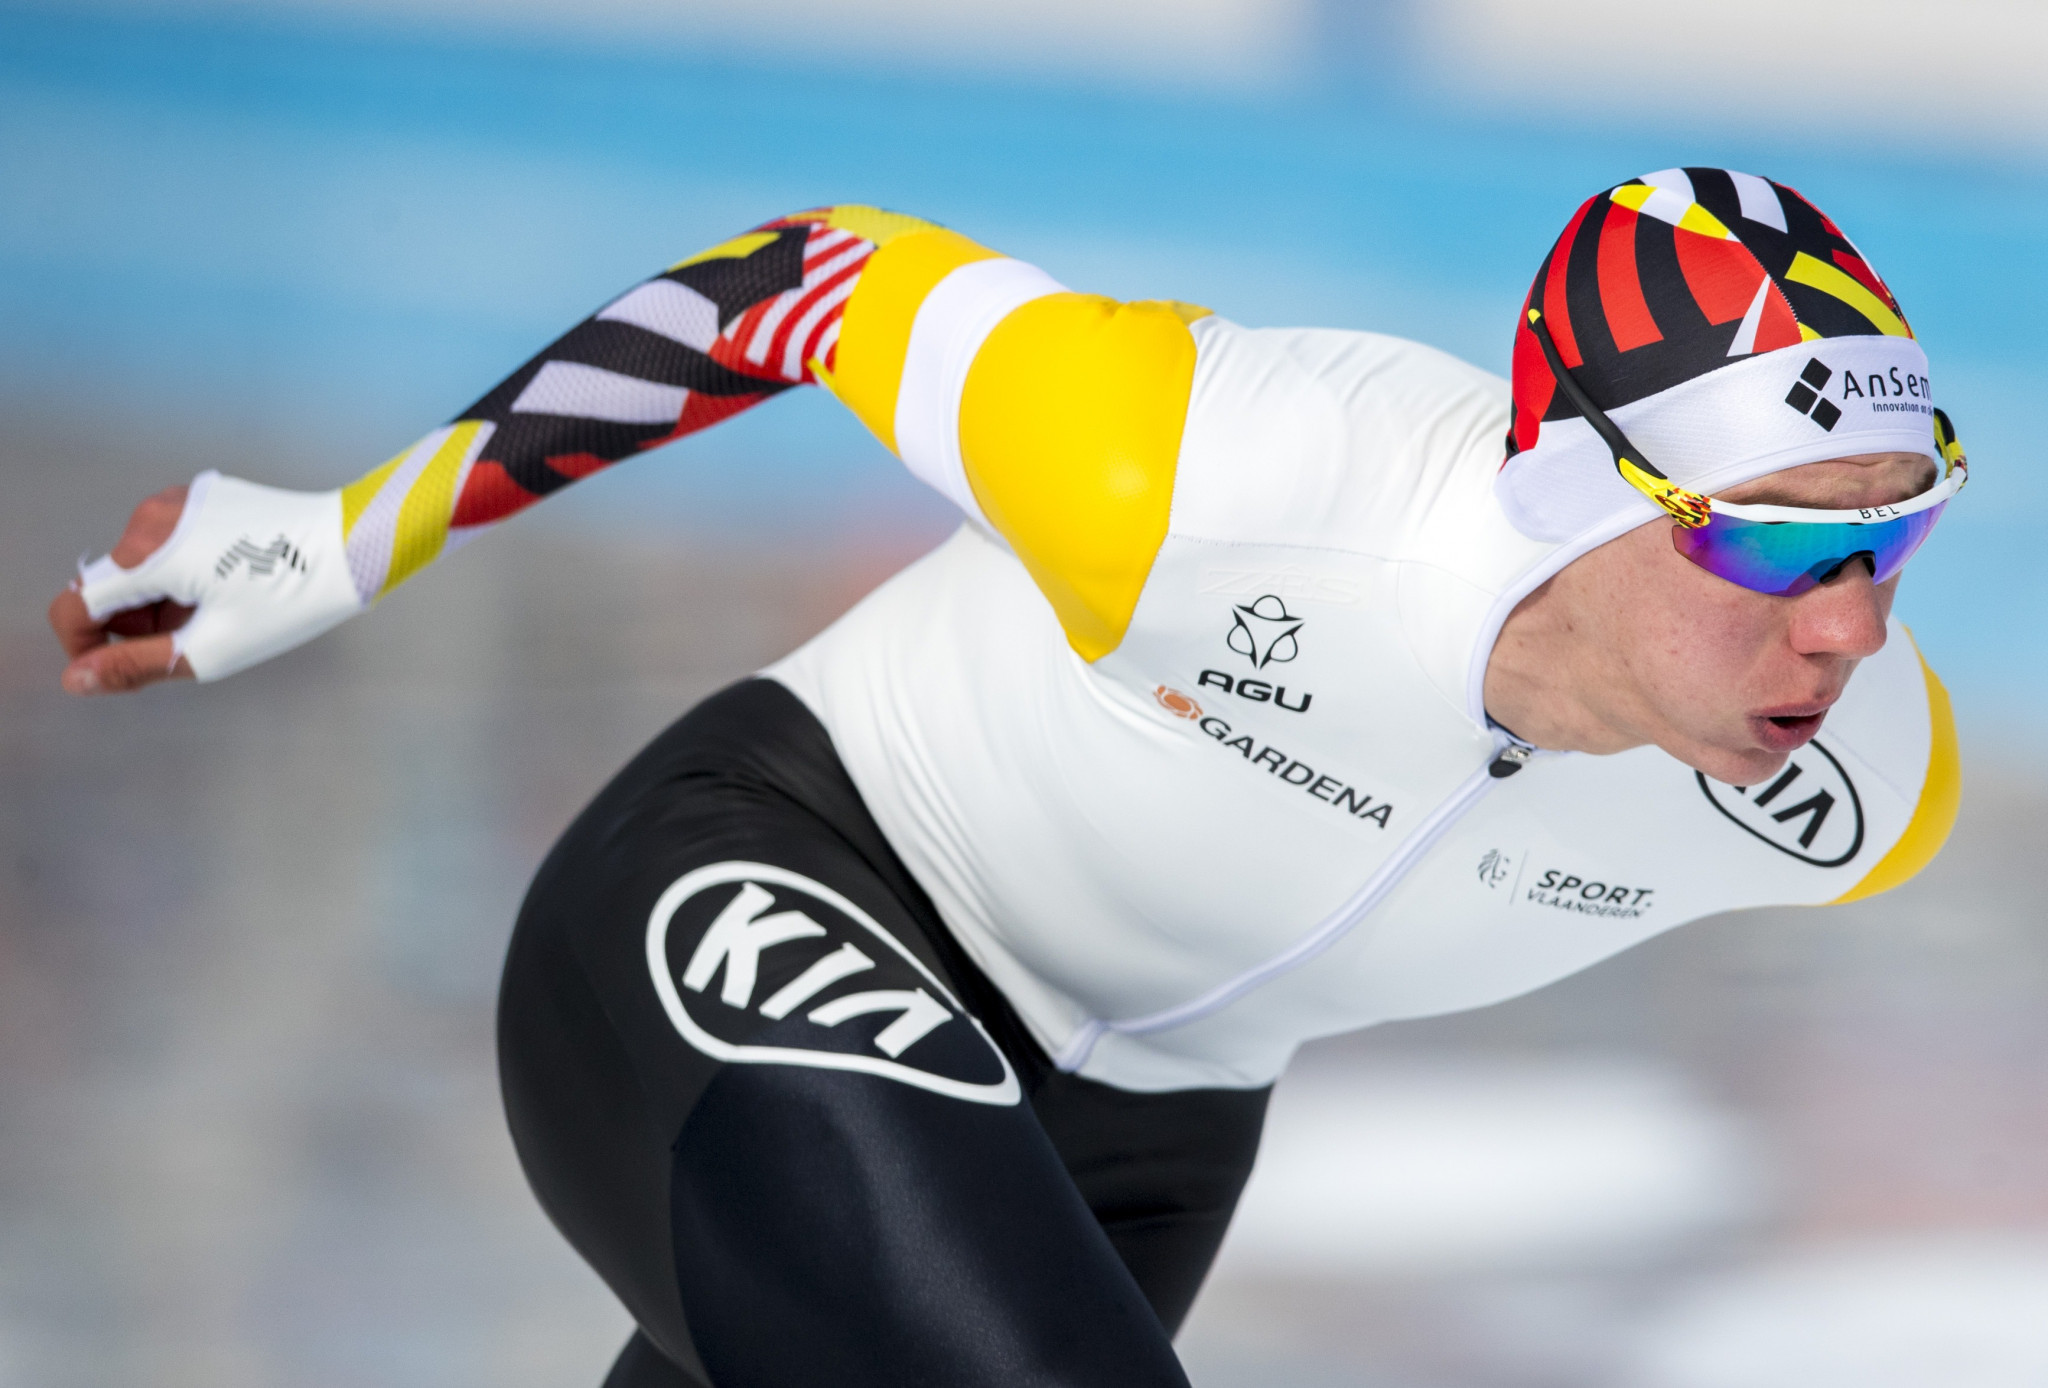 Bart Swings won Olympic silver for Belgium at Pyeongchang 2018 ©Getty Images